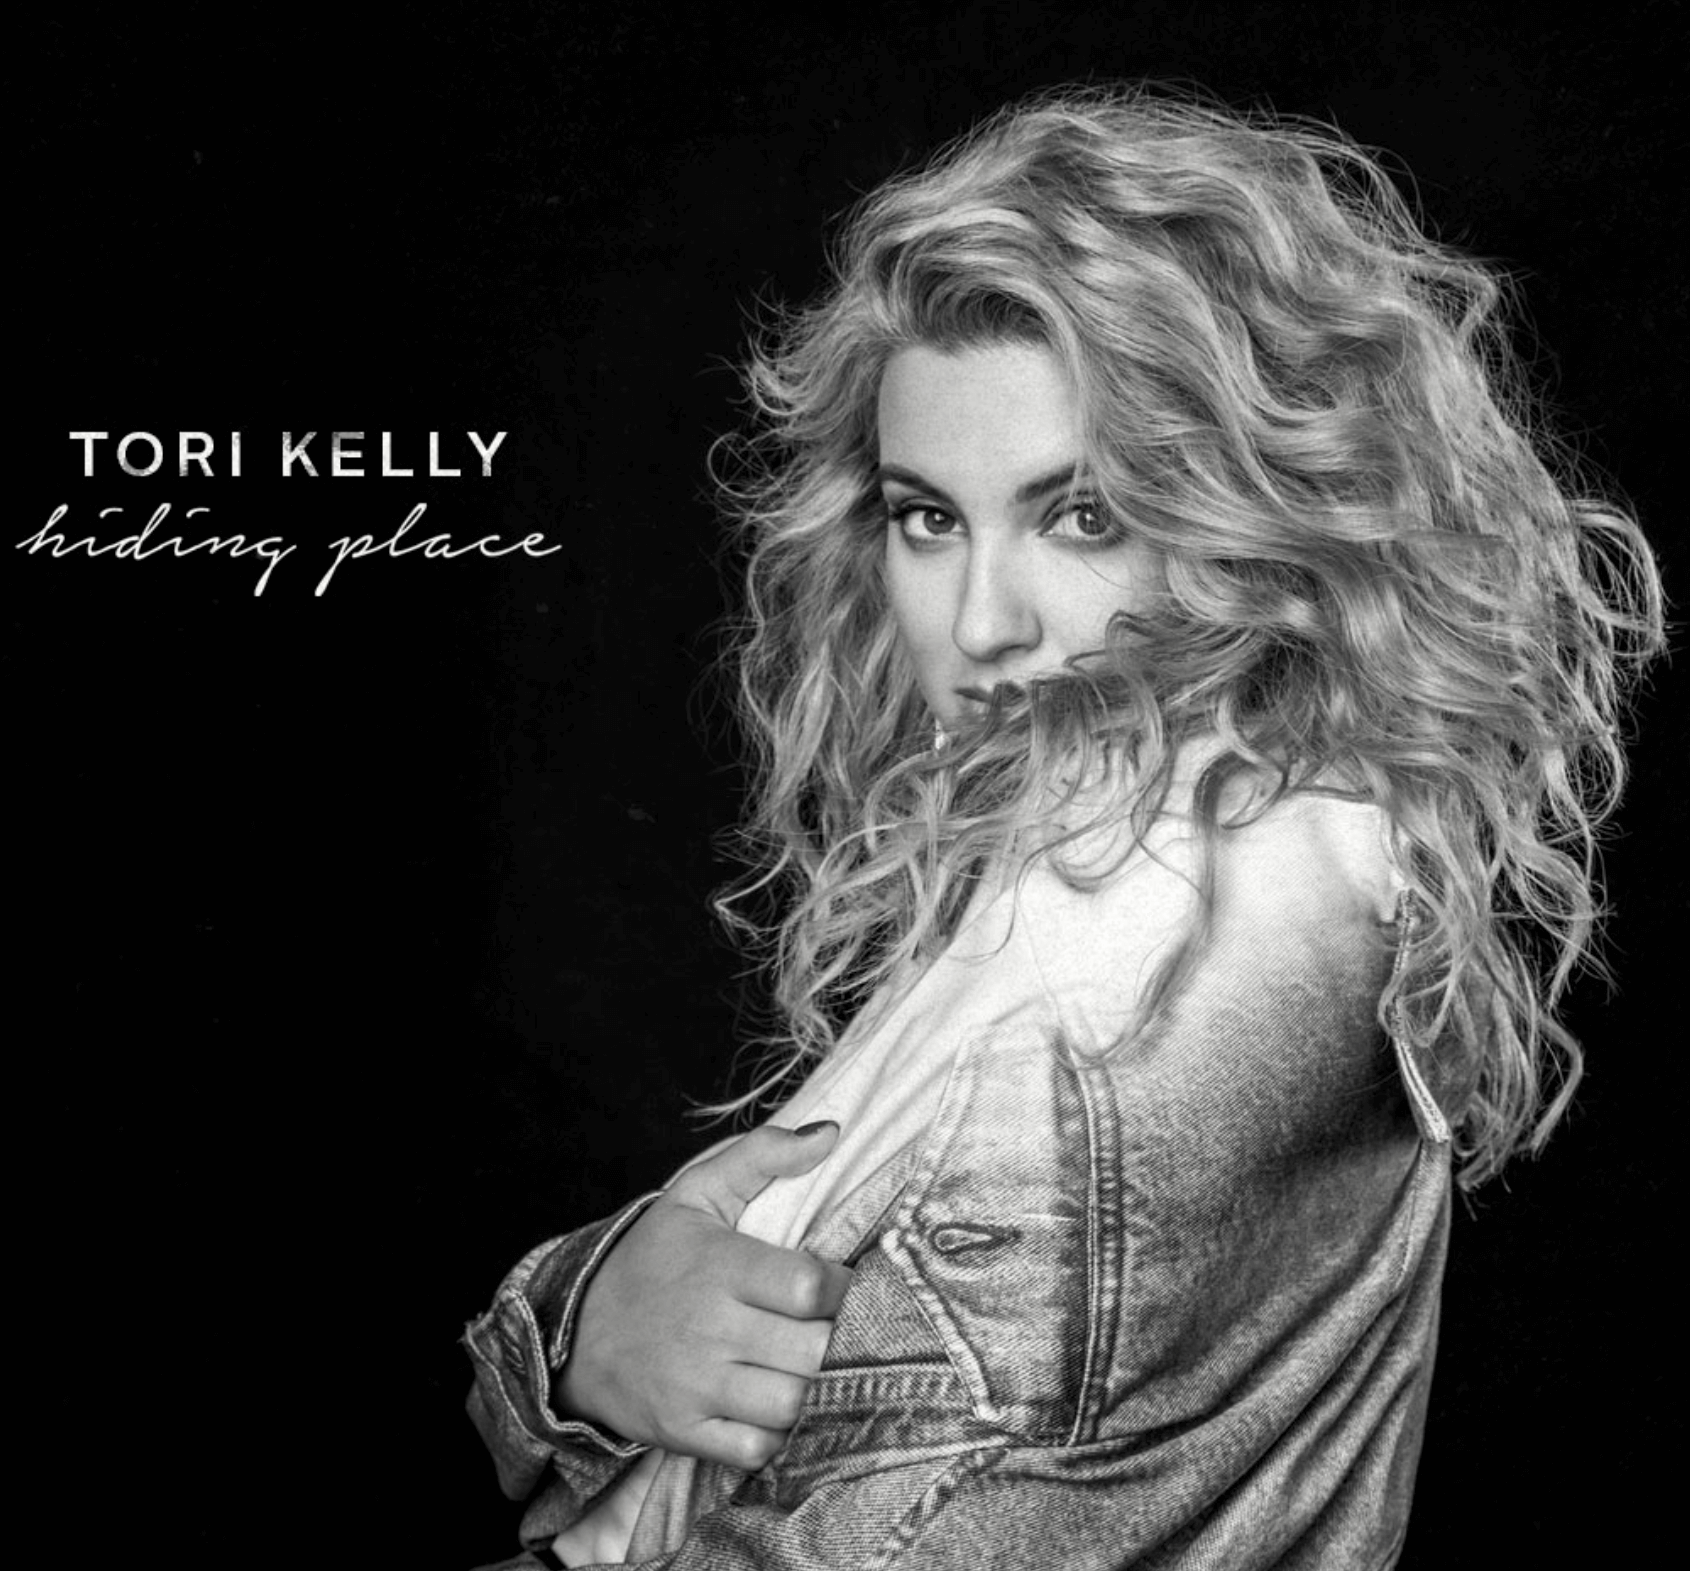 Watch Tori Kelly's Music Video for "Never Alone". 